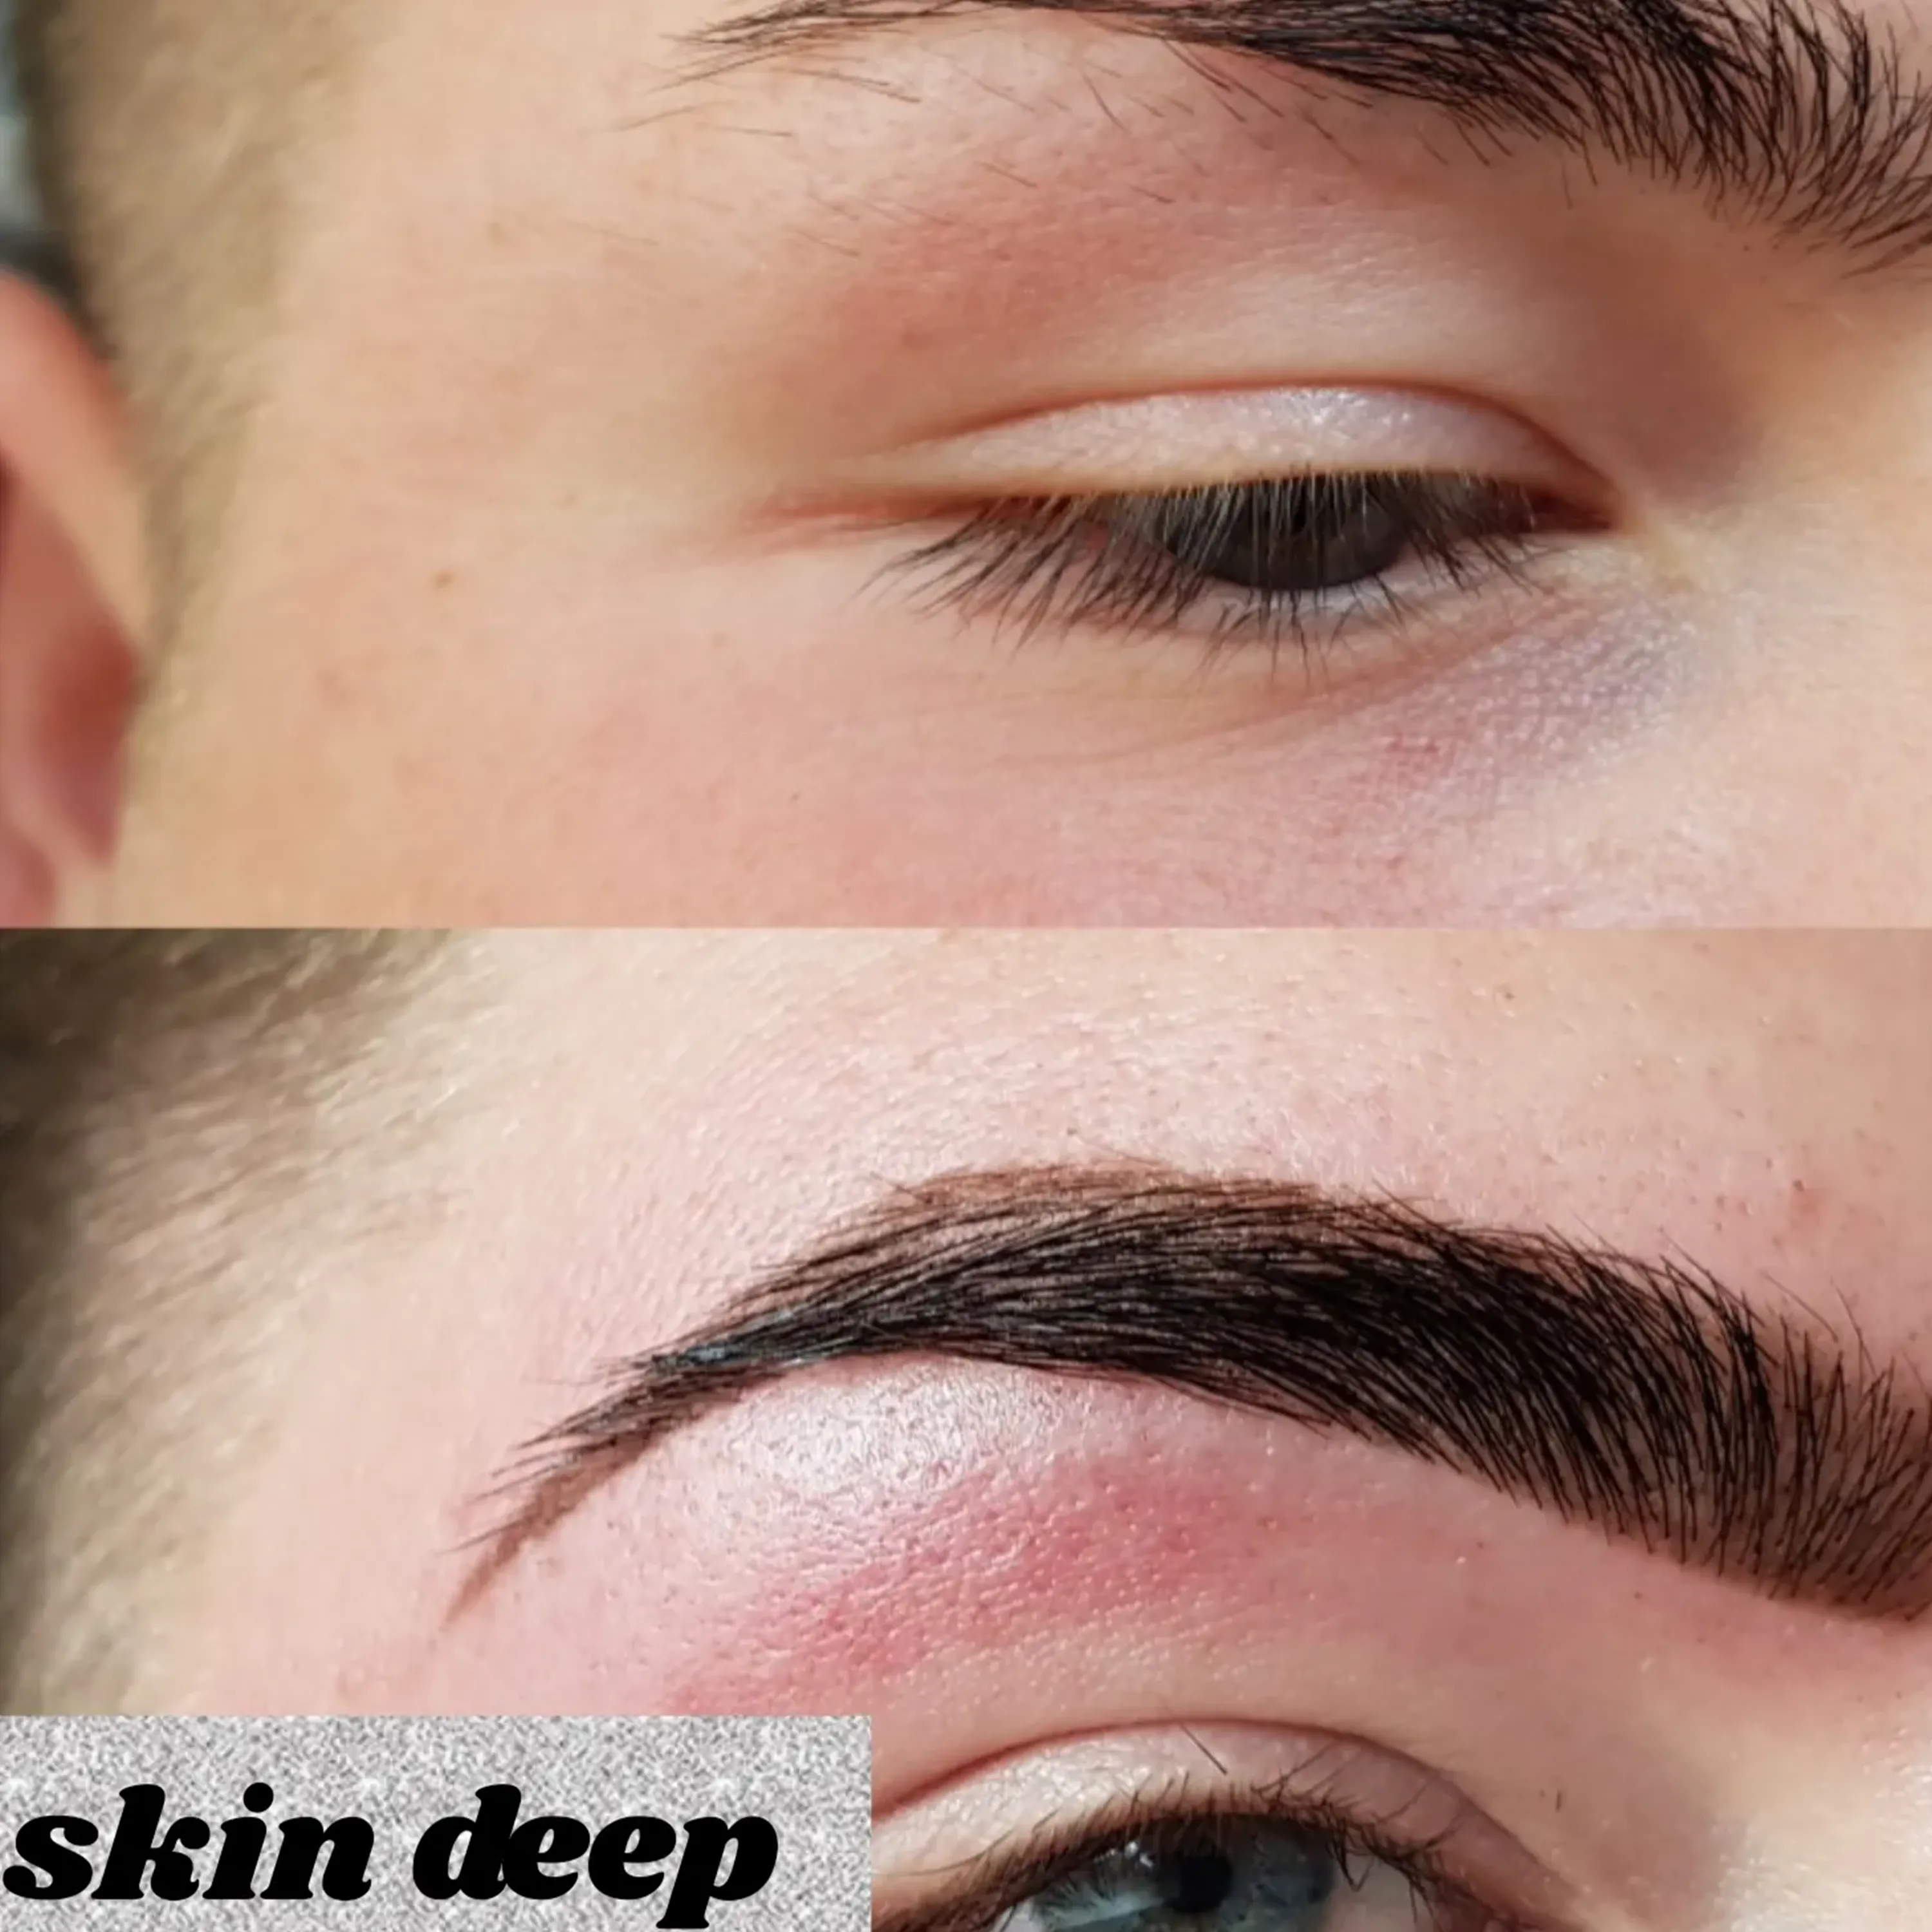 waxed eyebrows before and after